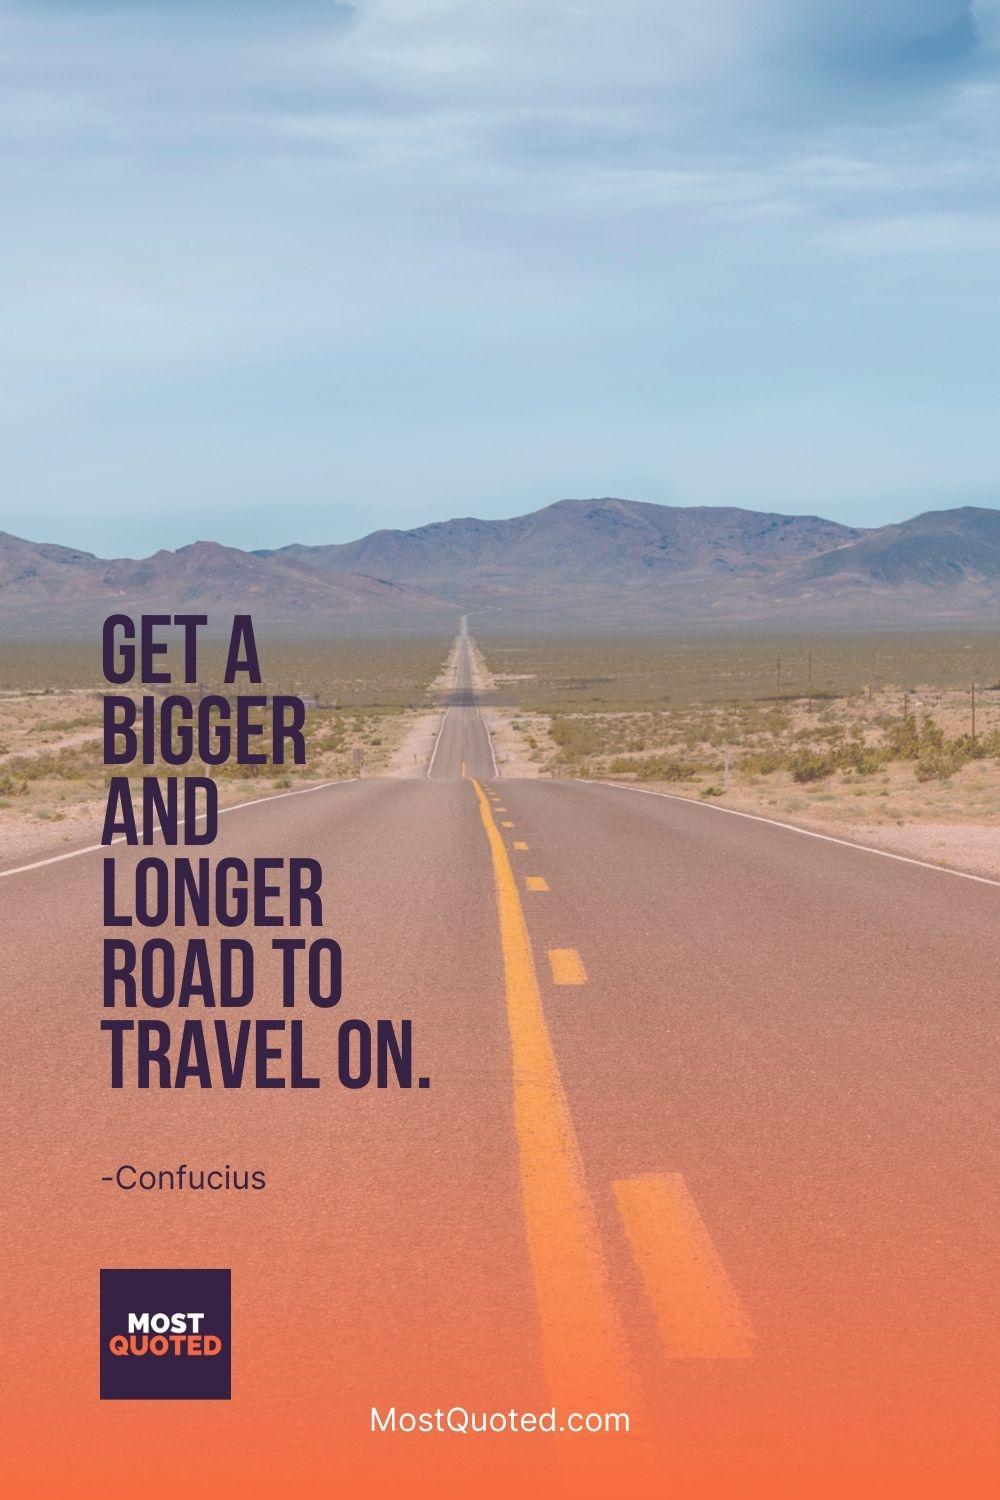 Get a bigger and longer road to travel on. - Confucius